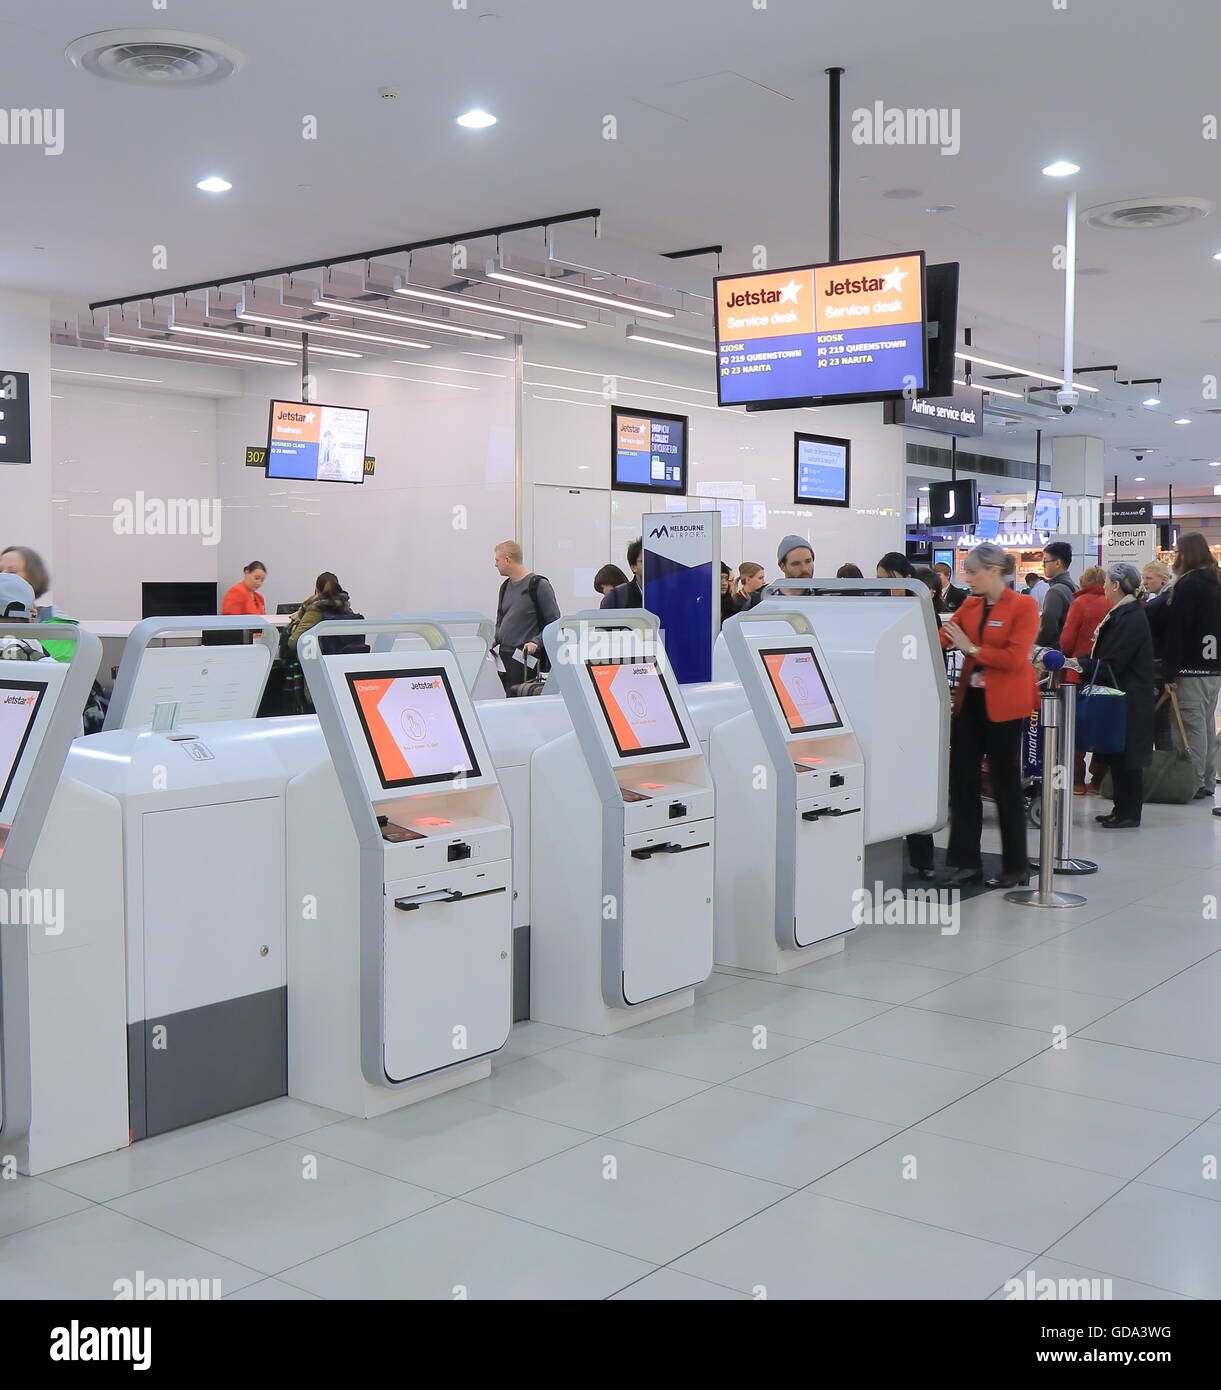 People check in at Jetstar check in counter at Melbourne airport Australia Stock Photo